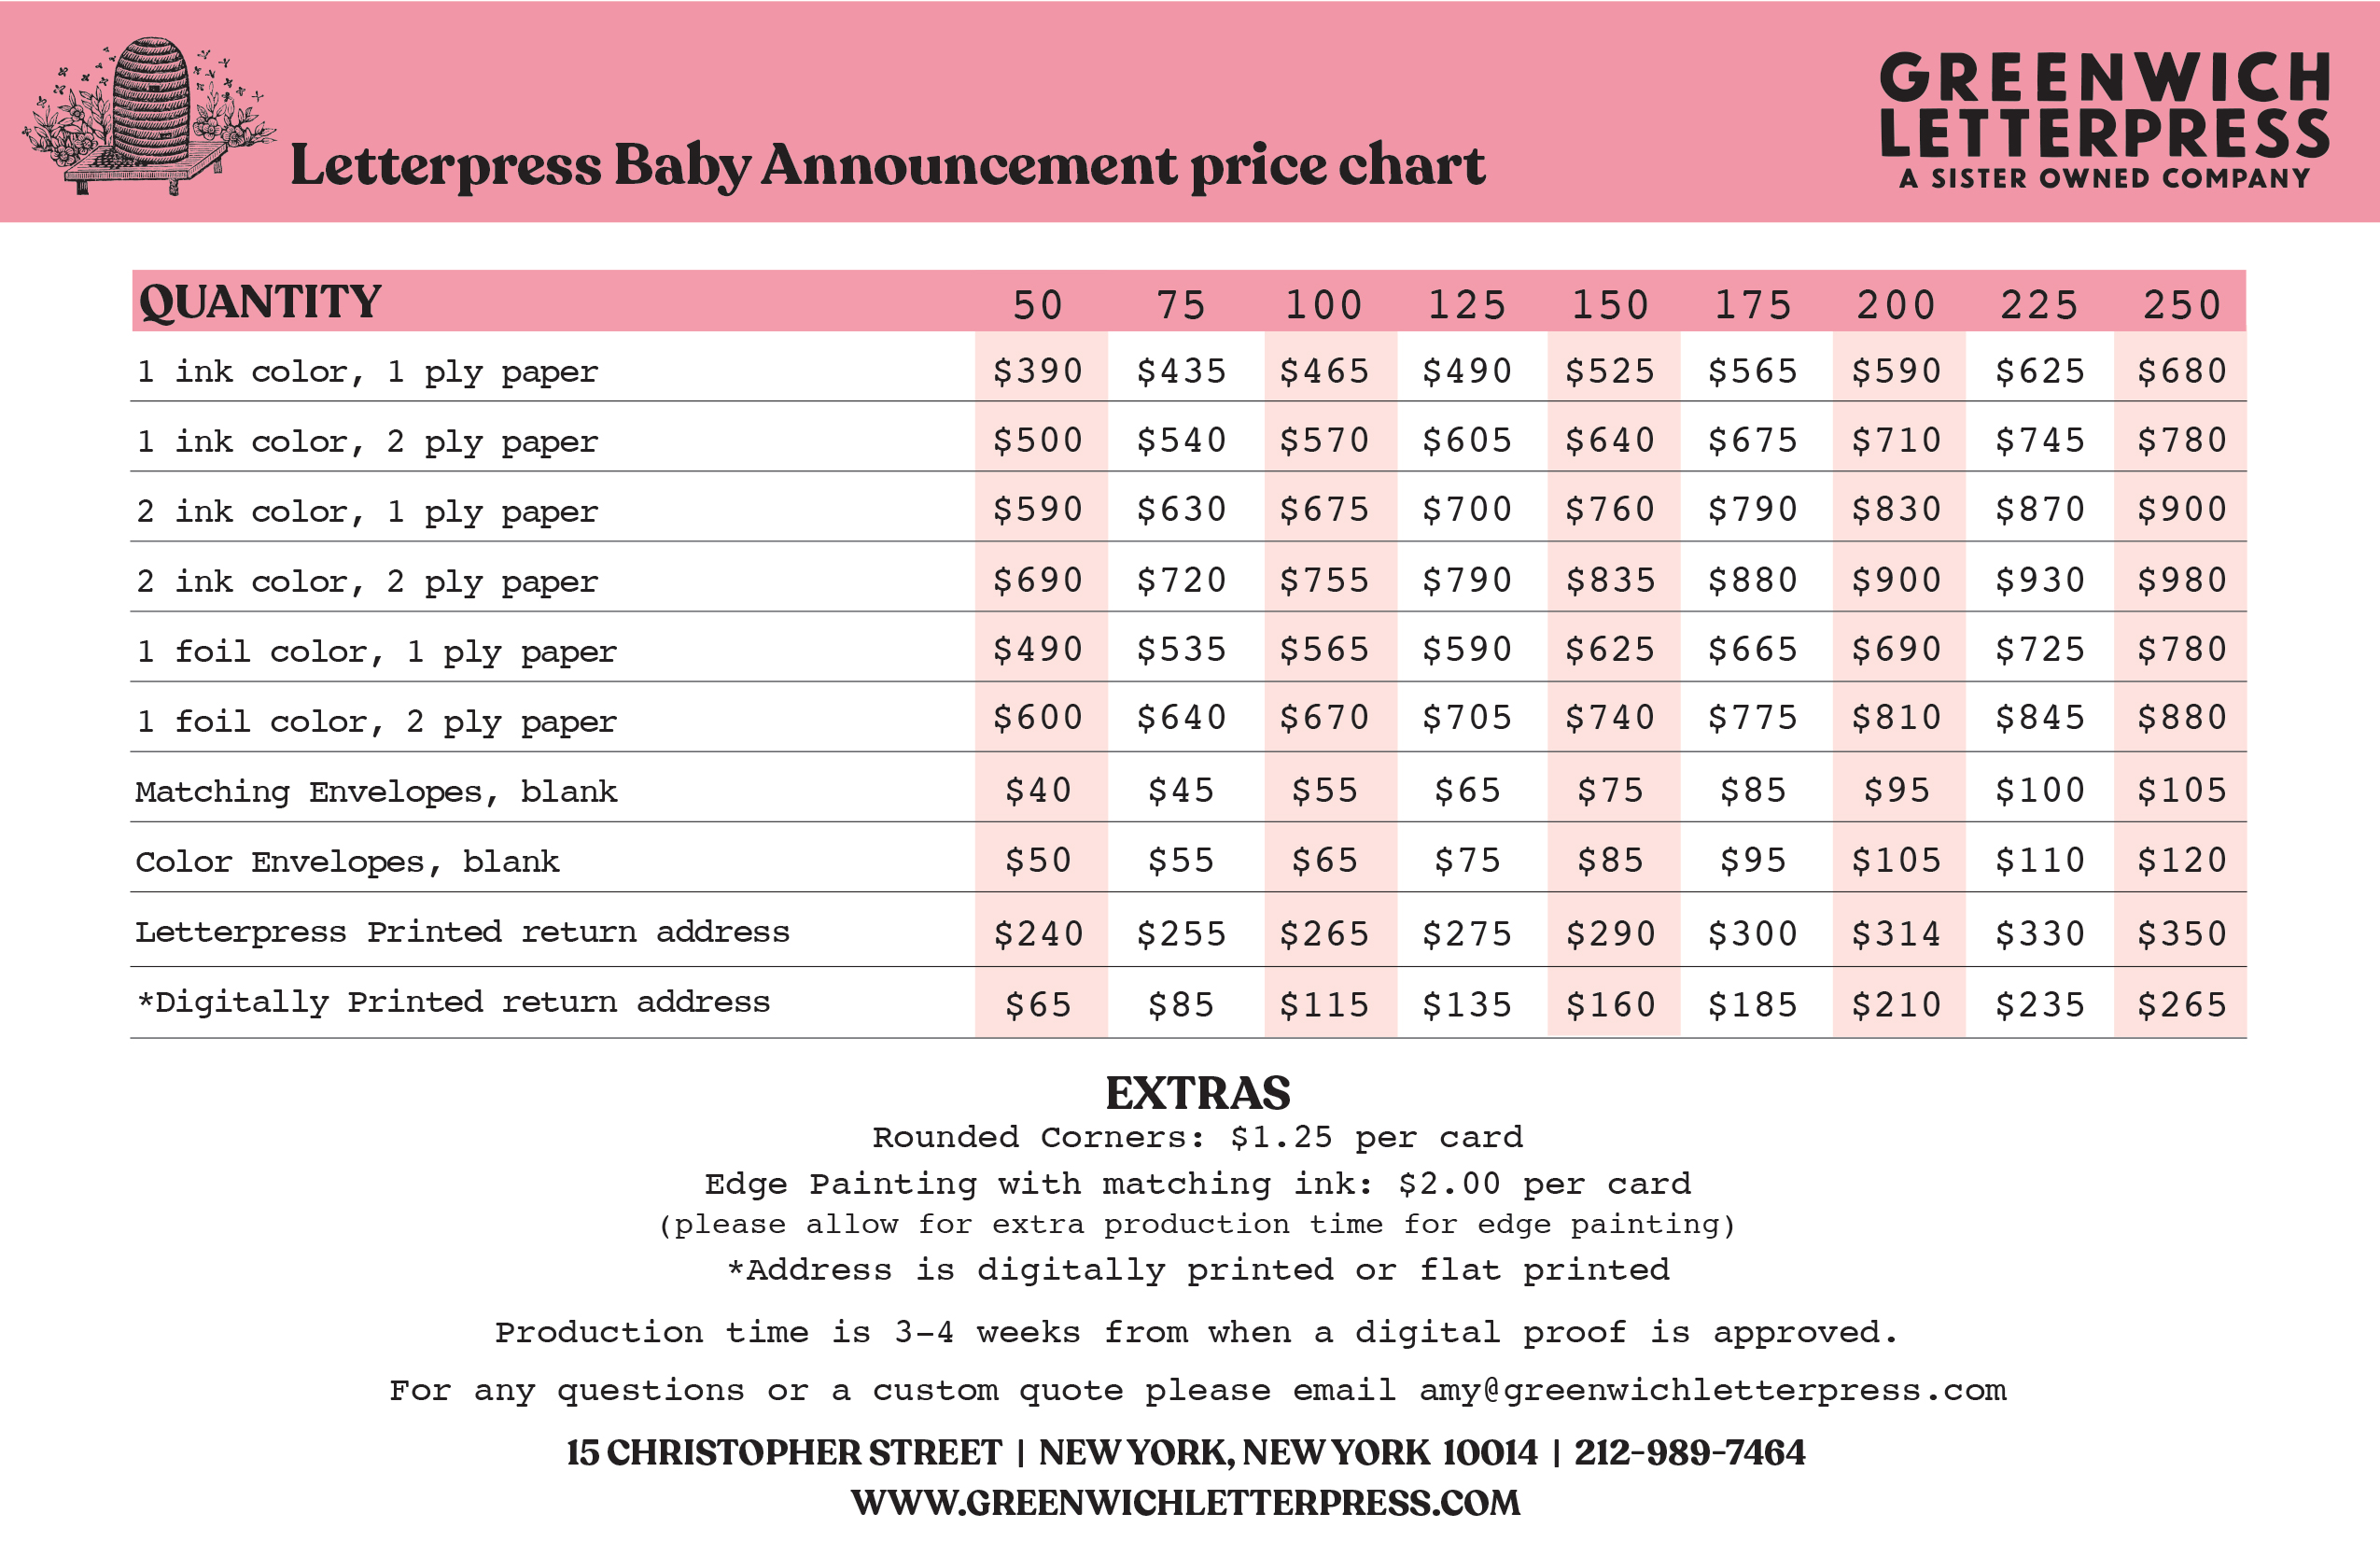 Letterpress Baby Announcements Price NYC